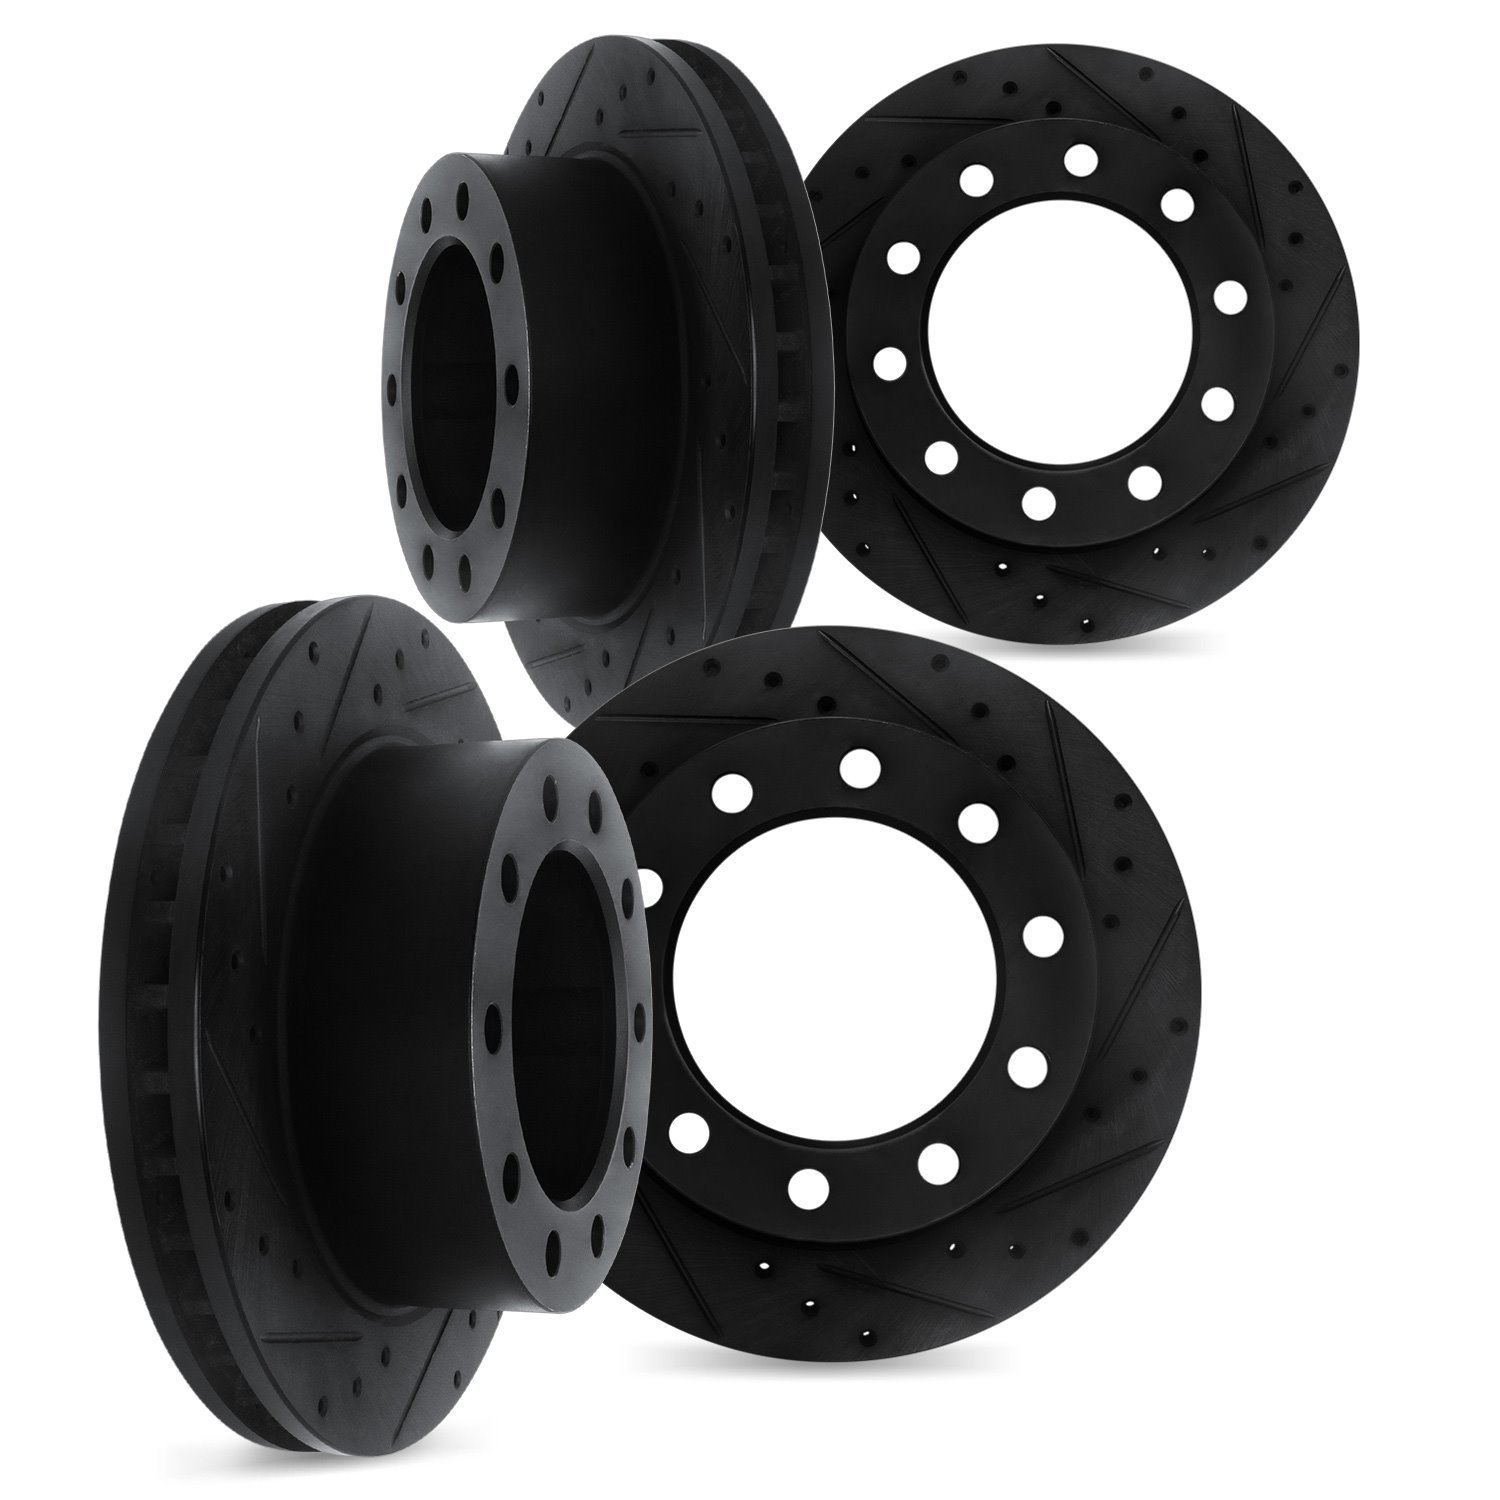 8004-54225 Drilled/Slotted Brake Rotors [Black], Fits Select Ford/Lincoln/Mercury/Mazda, Position: Front and Rear